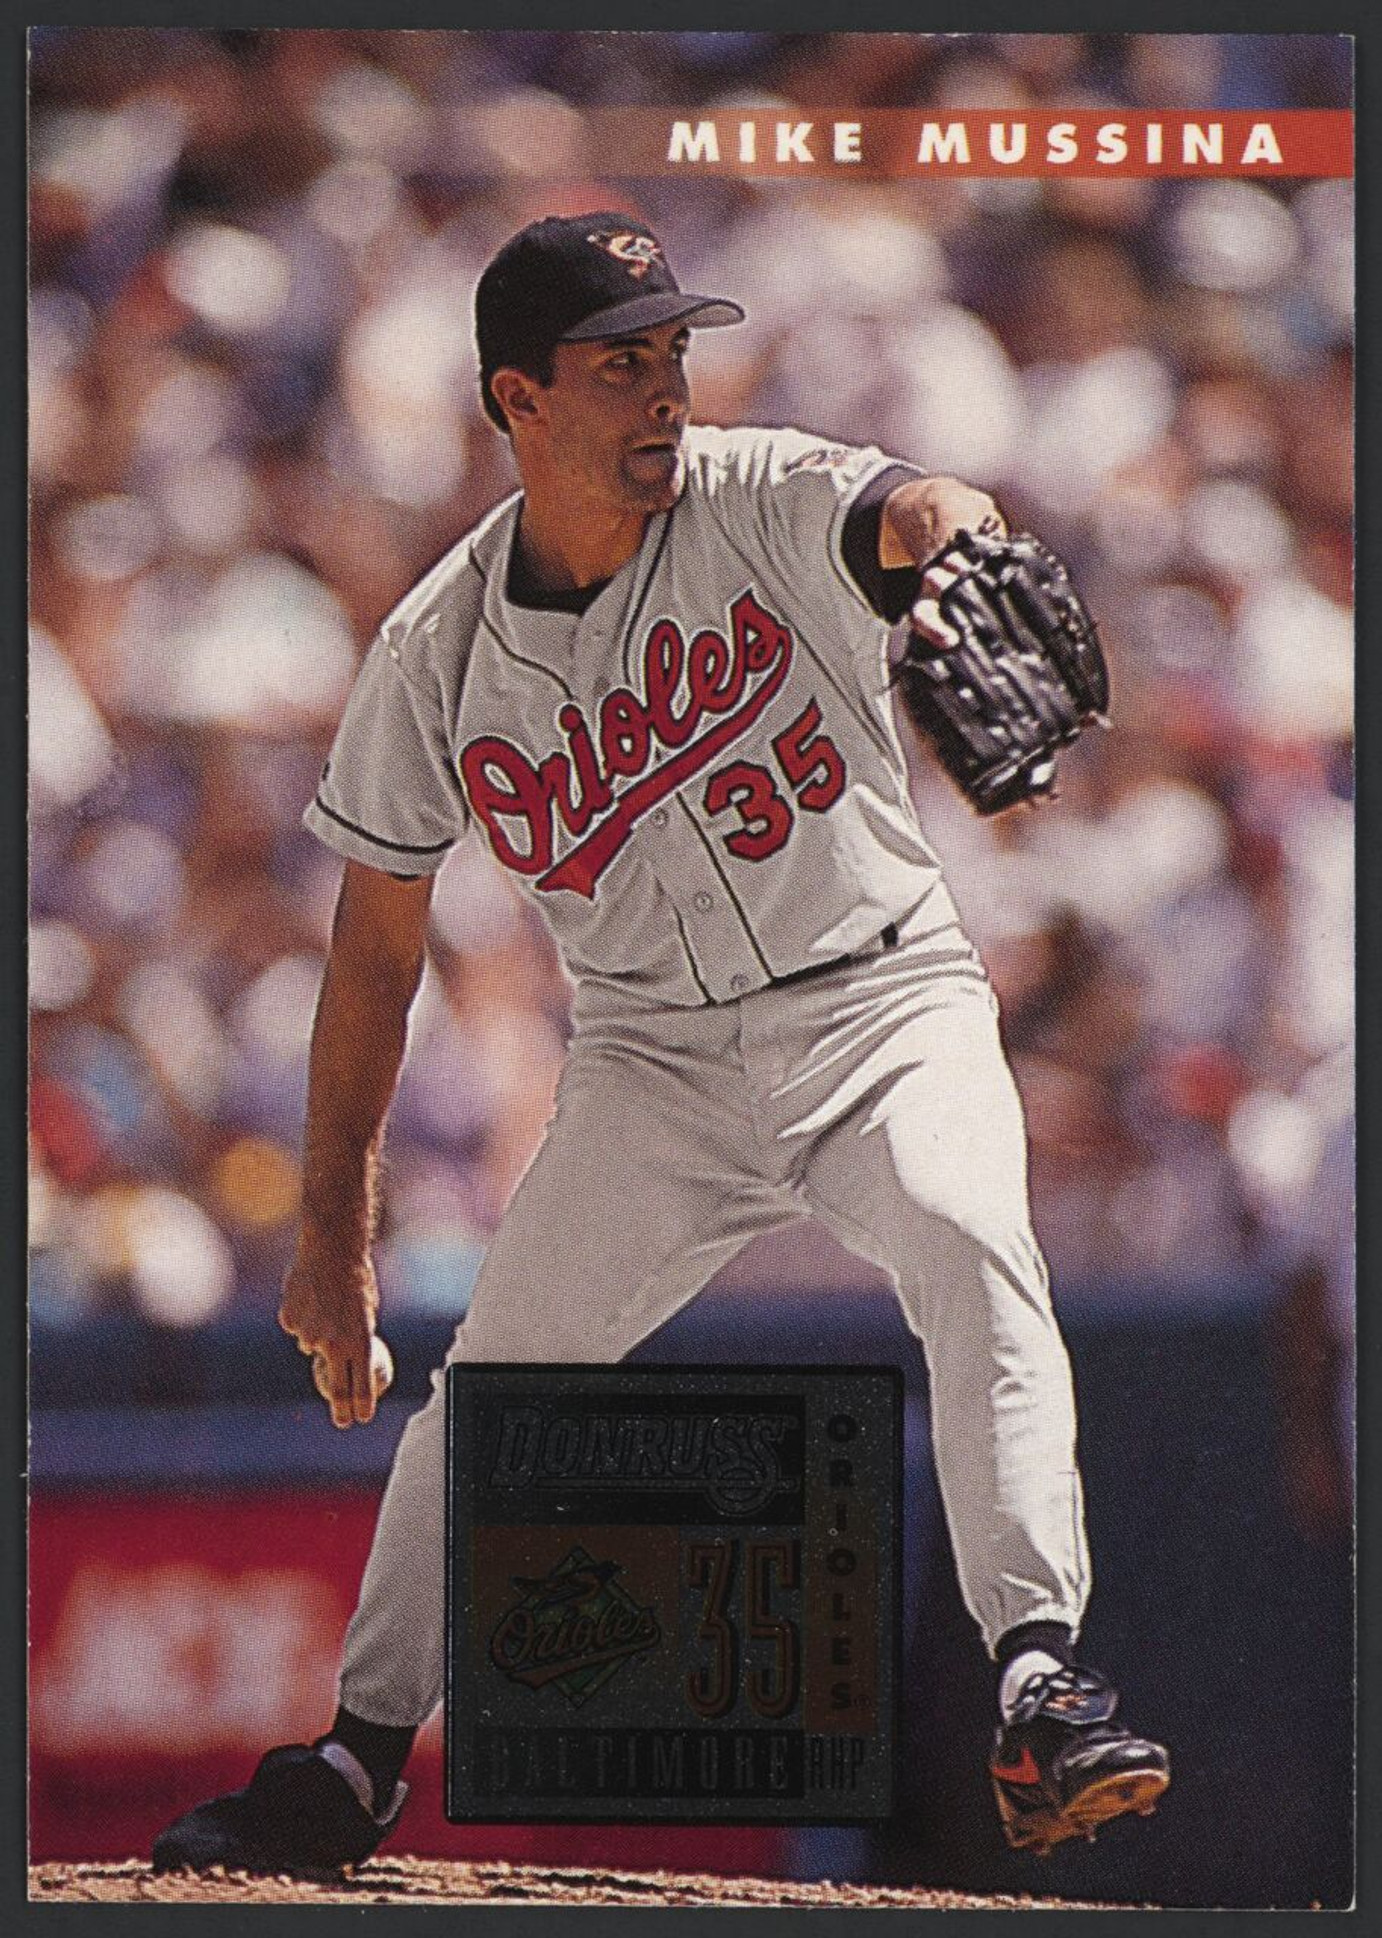 1996 Donruss #518 Mike Mussina Orioles EX